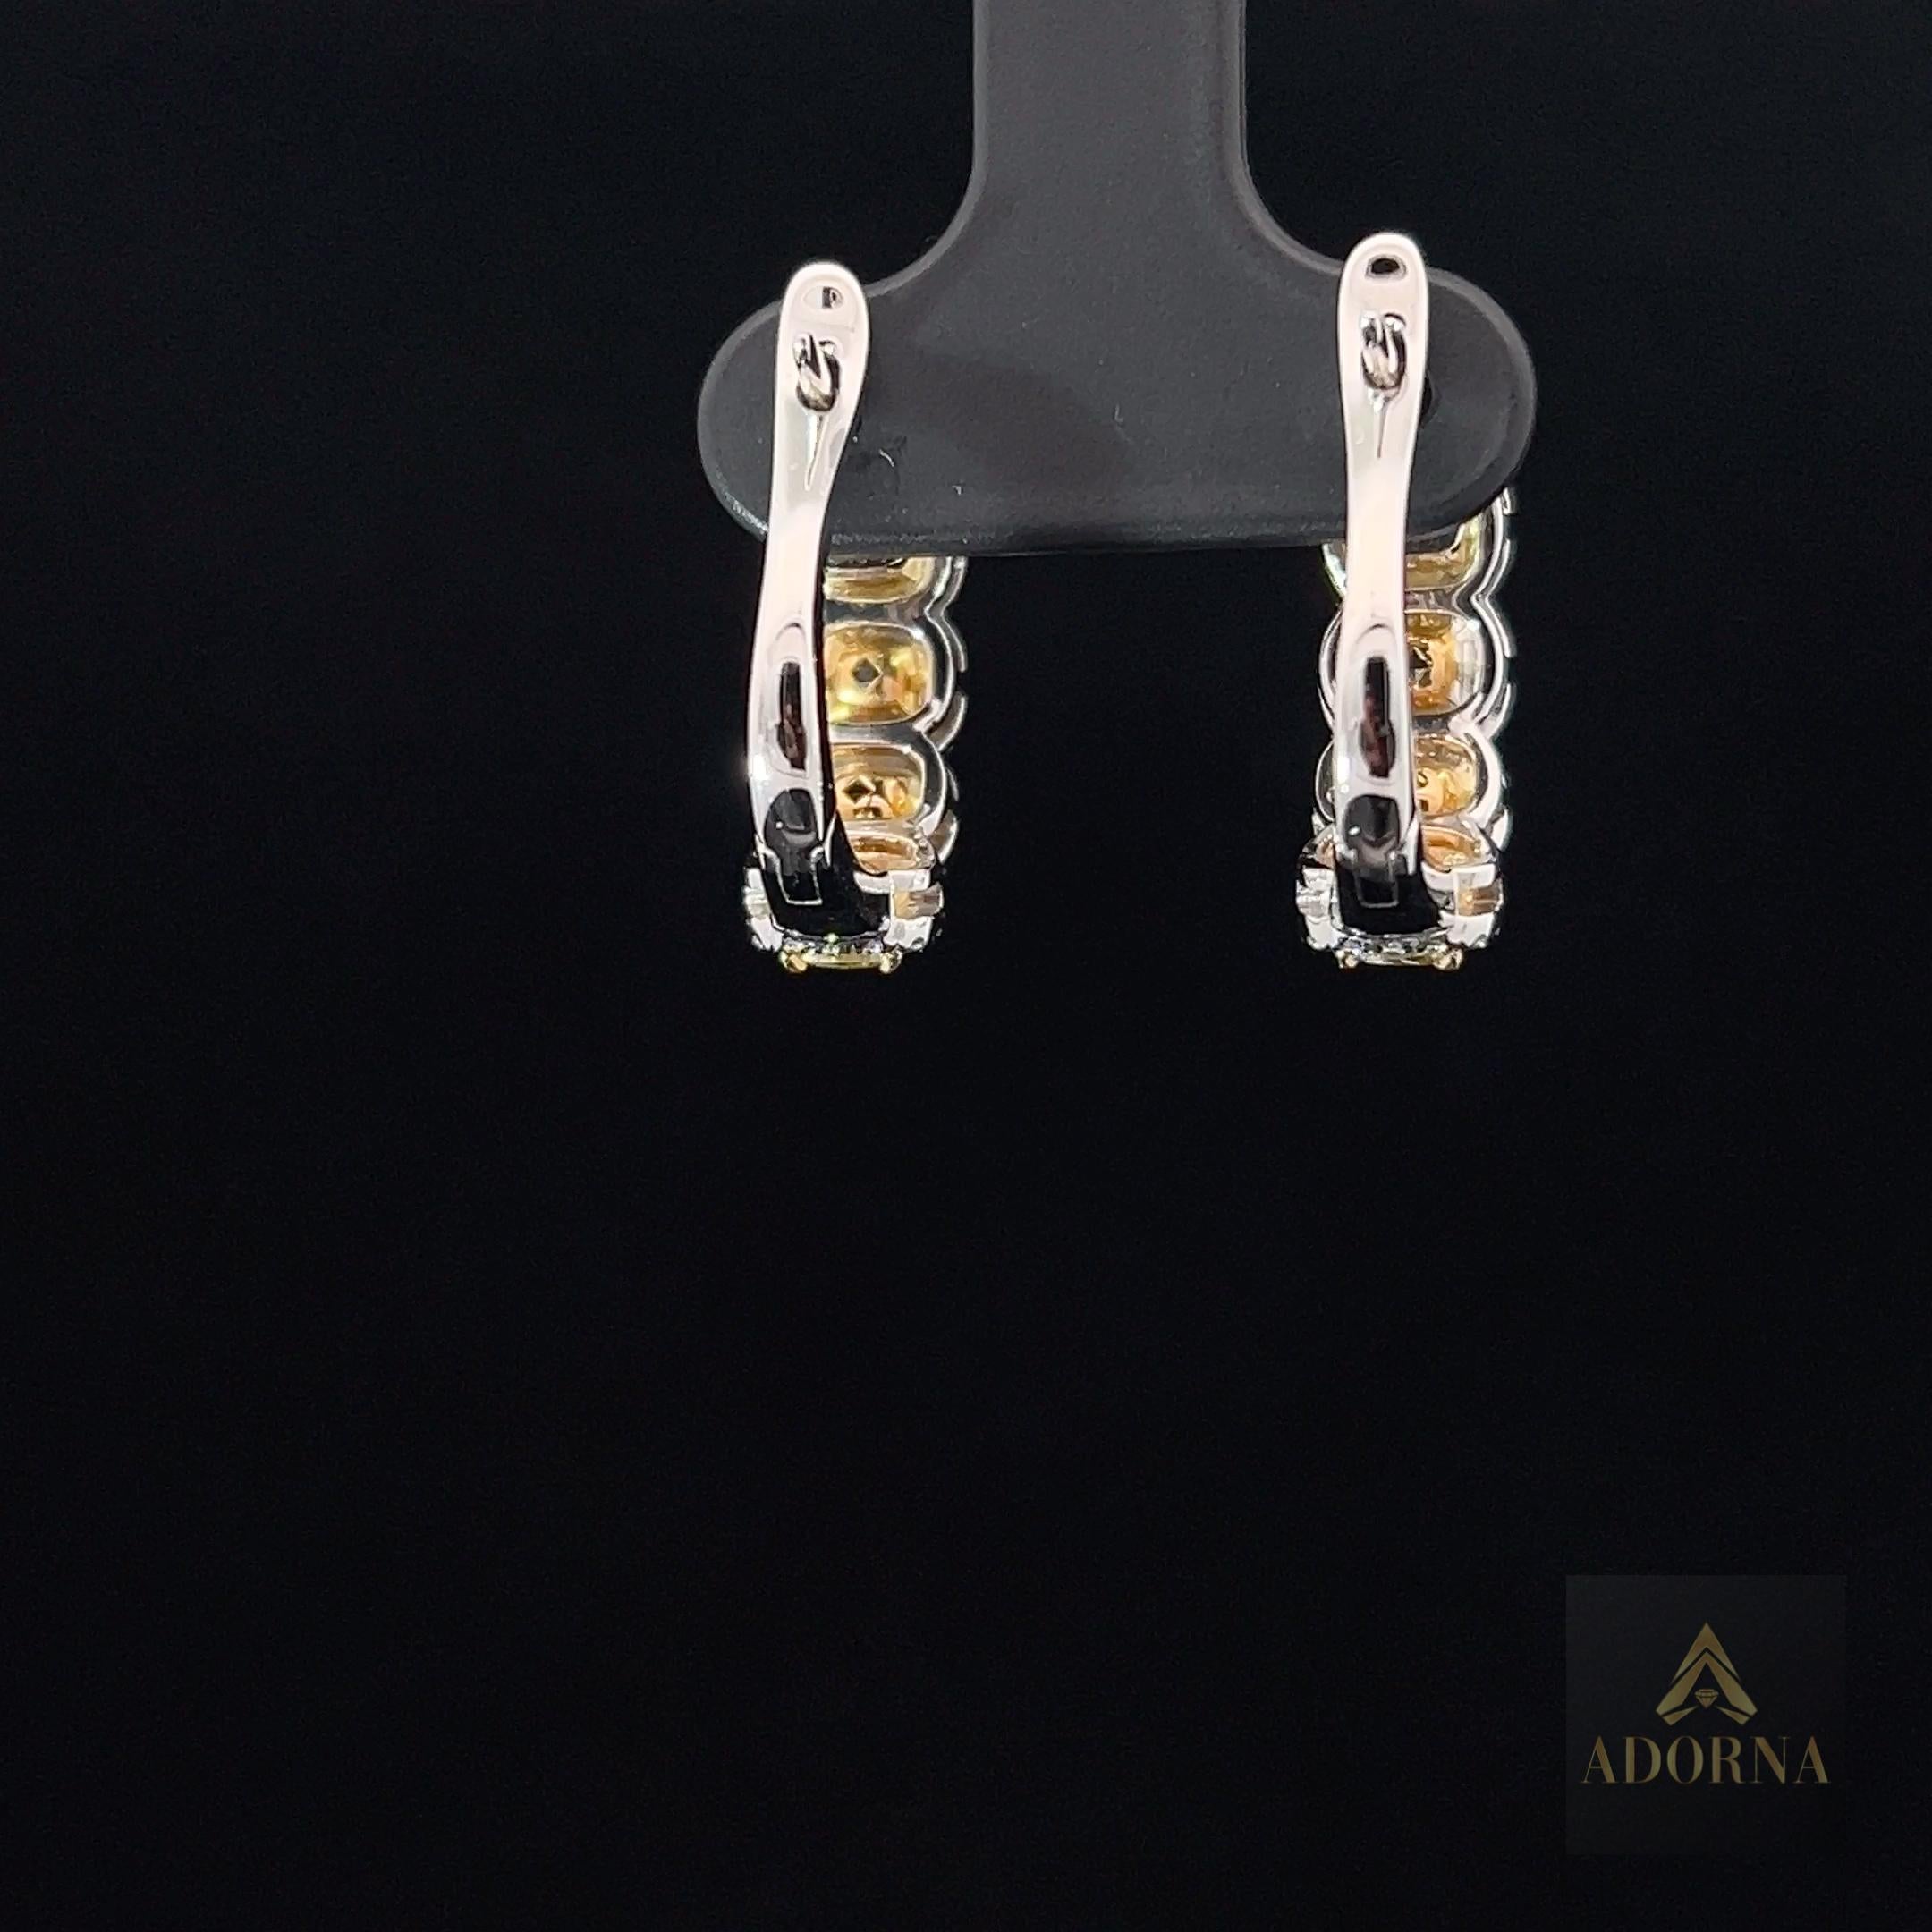 Earring Information
Diamond Type : Natural Diamond
Metal : 18K
Metal Color : Yellow Gold, White Gold
Diamond Carat Weight : 2.50ttcw


JEWELRY CARE
Over the course of time, body oil and skin products can collect on Jewelry and leave a residue which